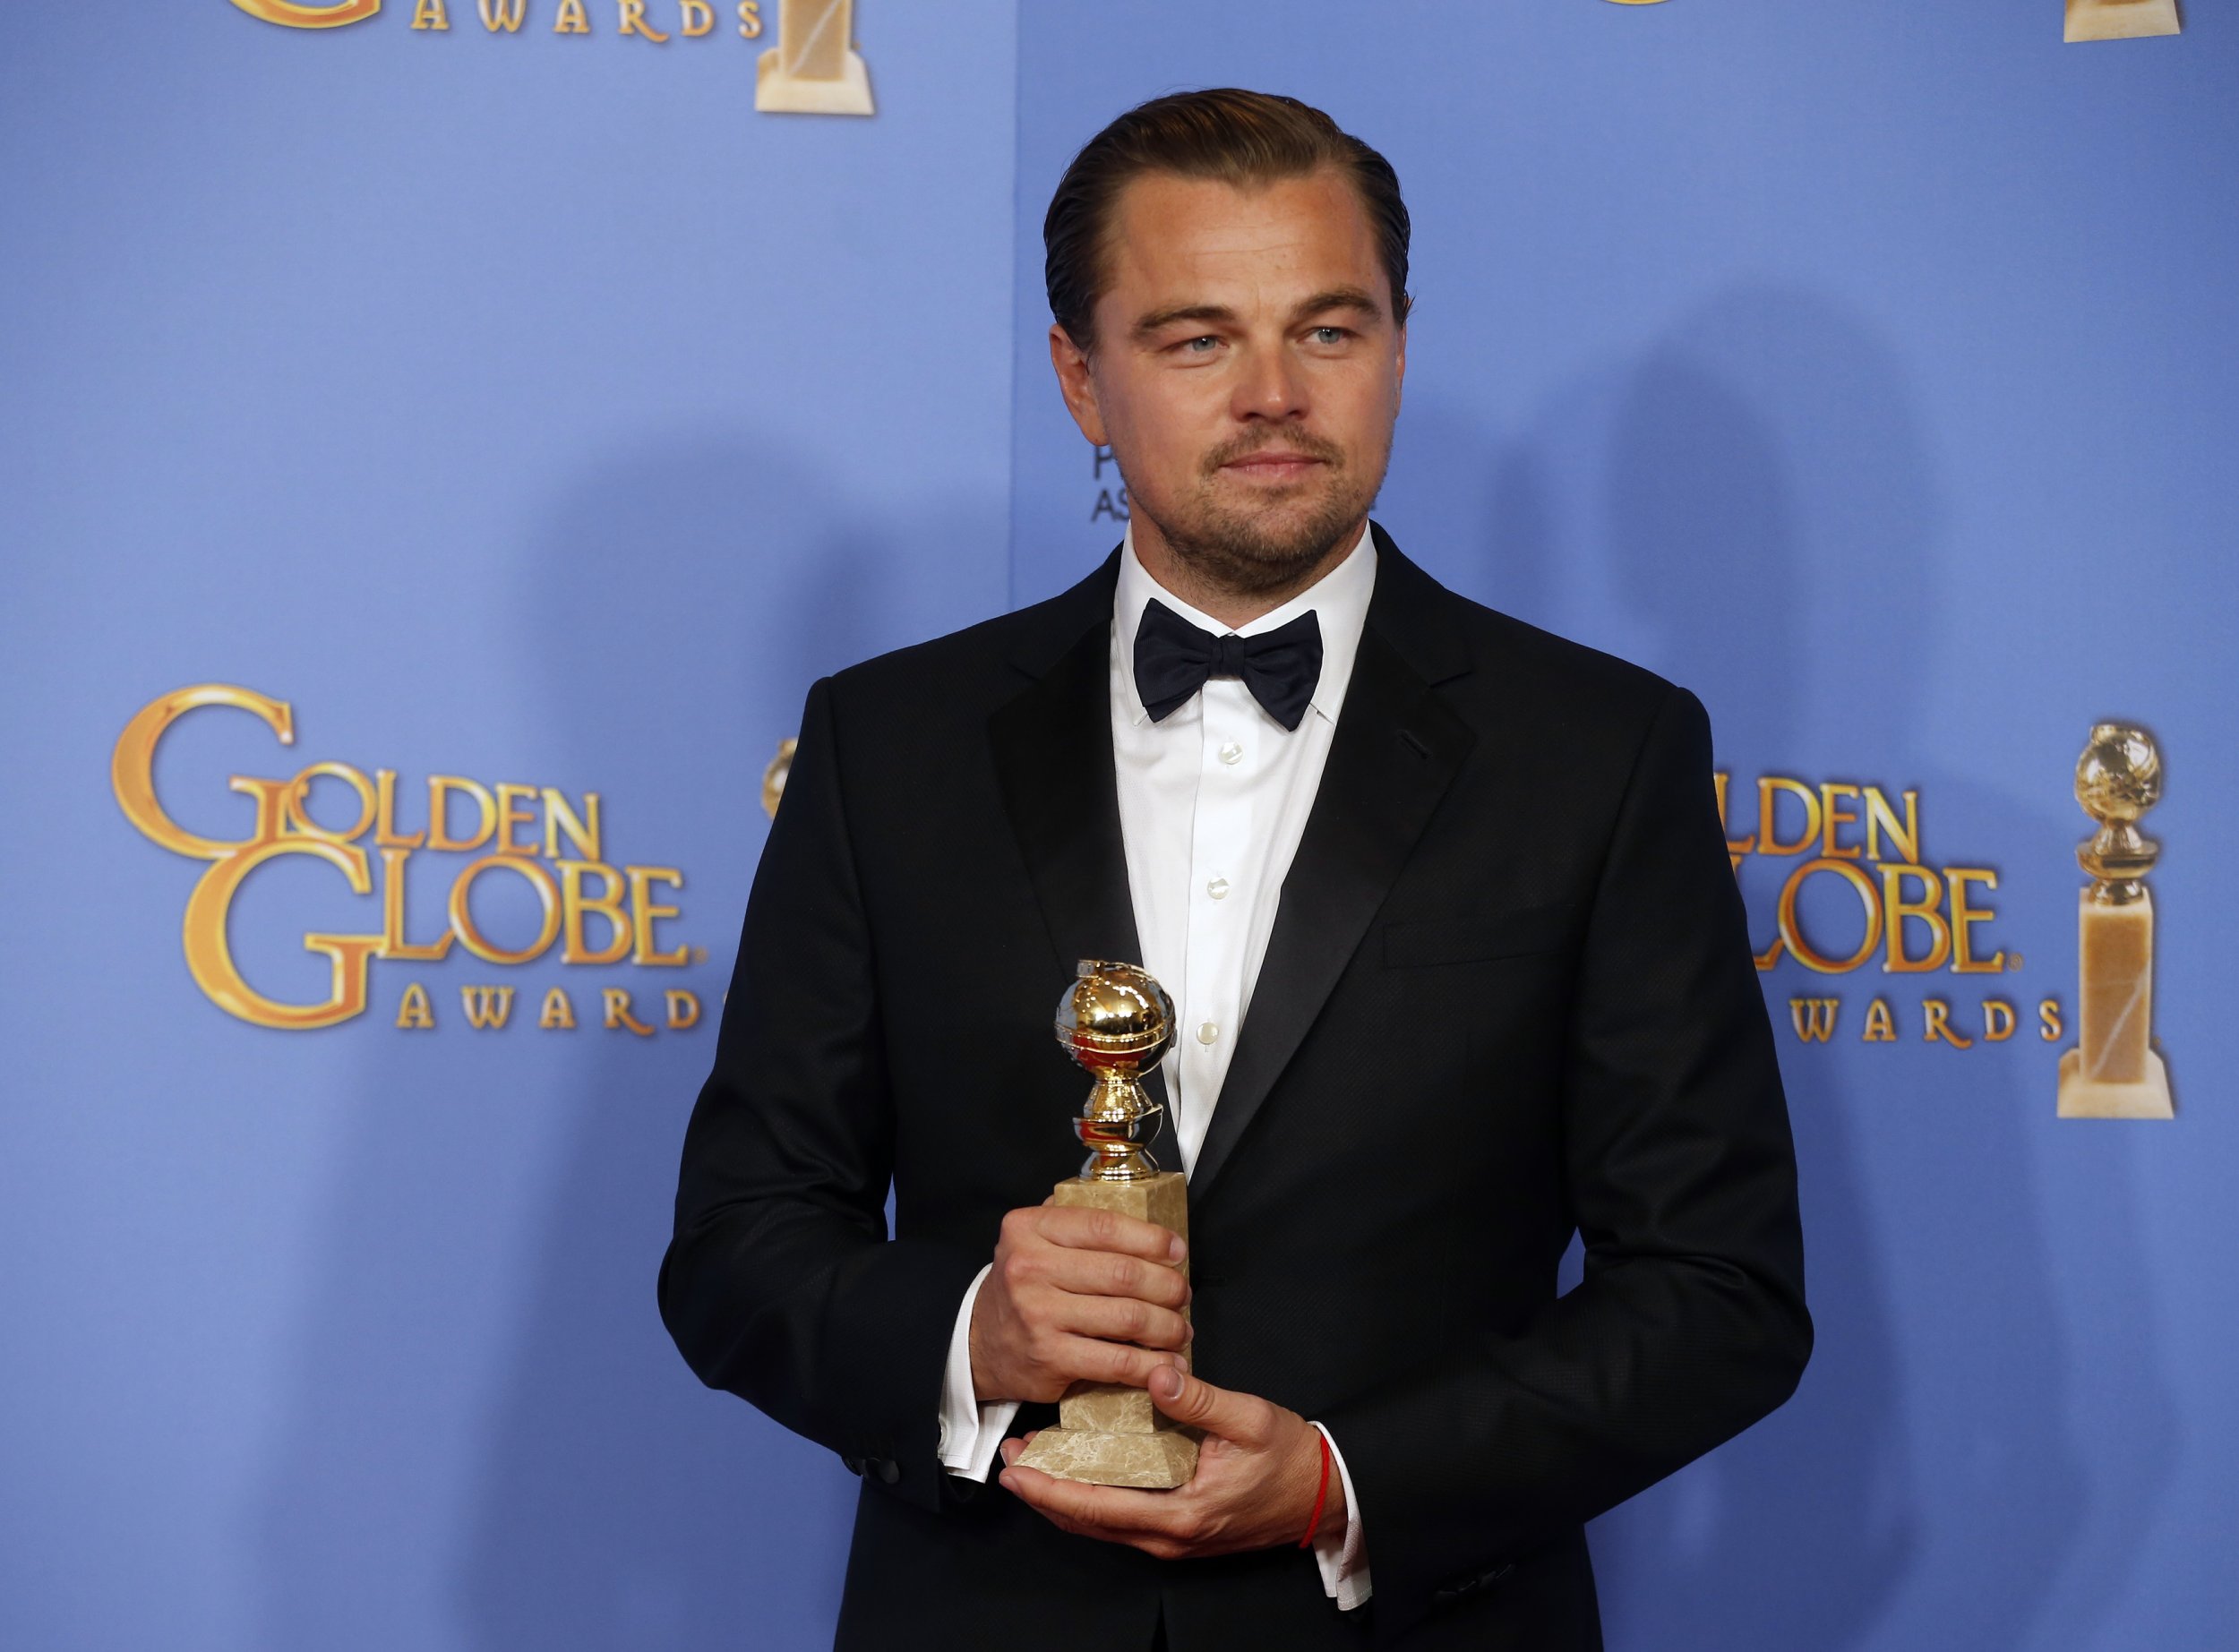 Oscar Nominations Lead To Box Office Success For The Revenant 